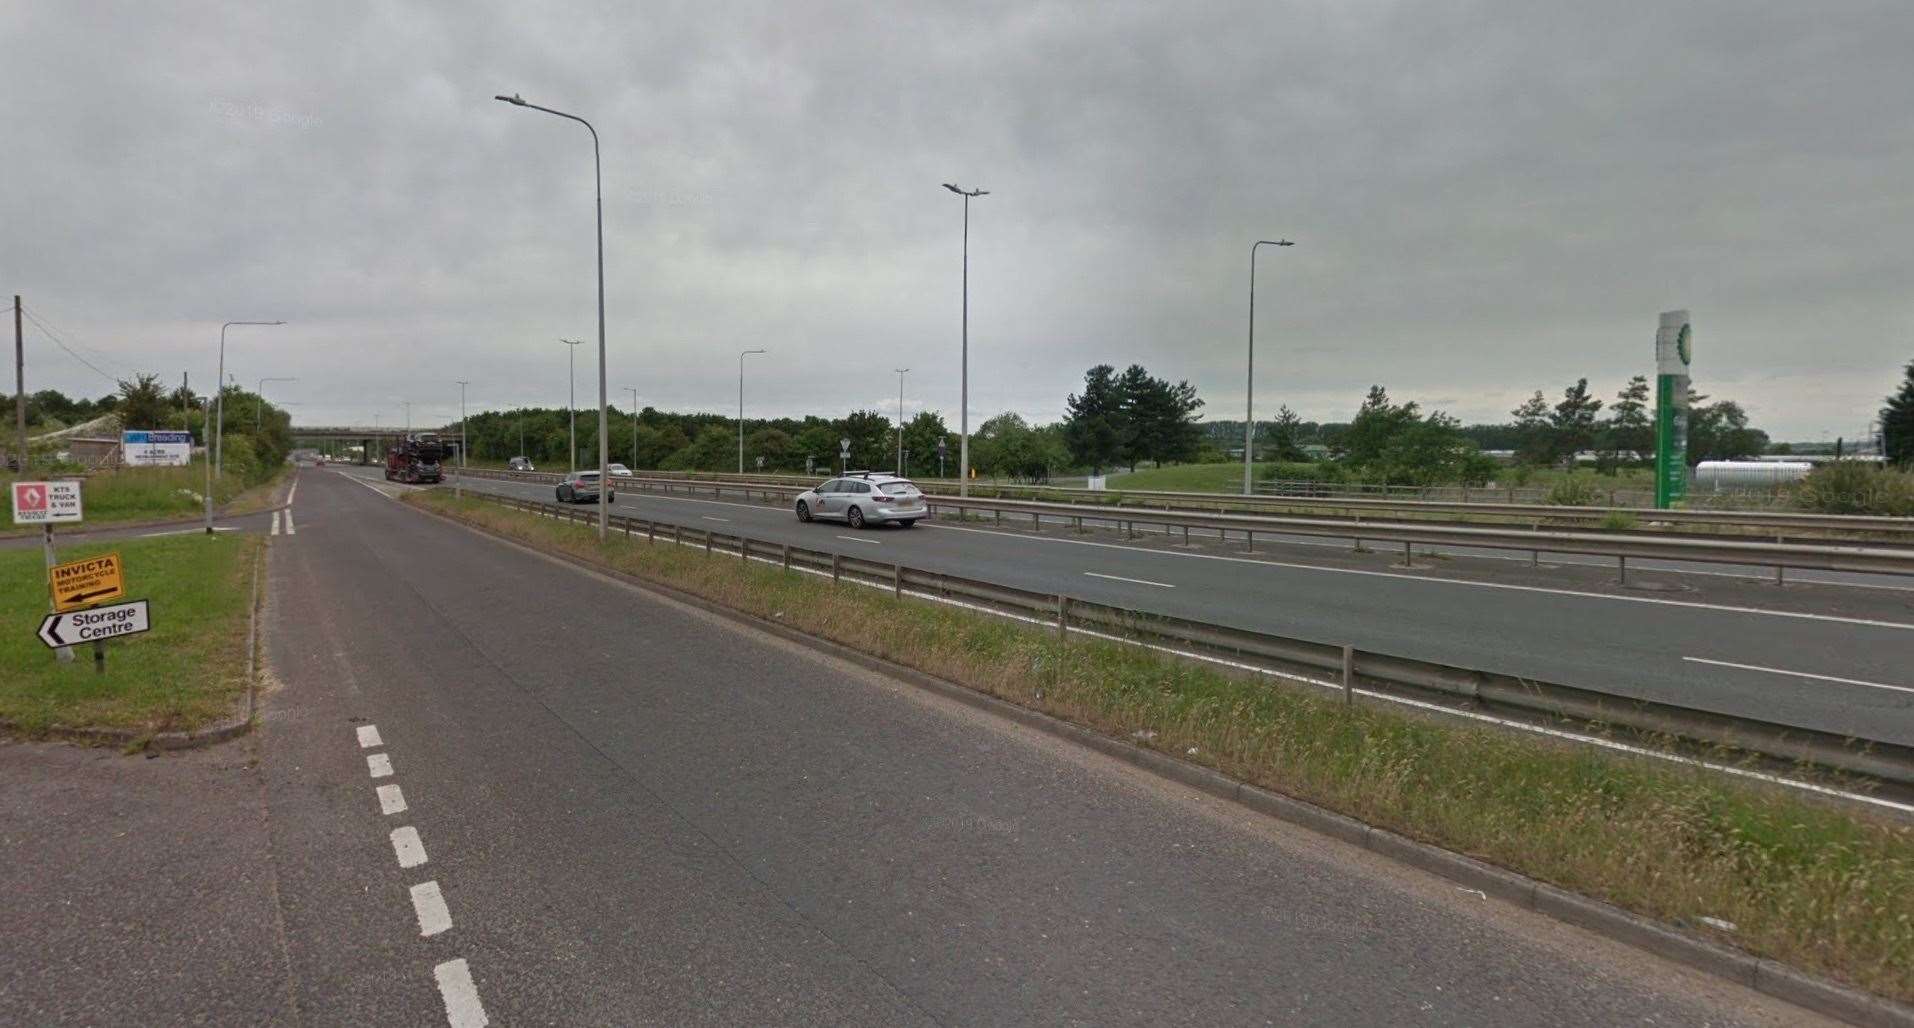 Mr Murray and other motorists avoided the person in the road just after the Dargate services. Image: Google Street View